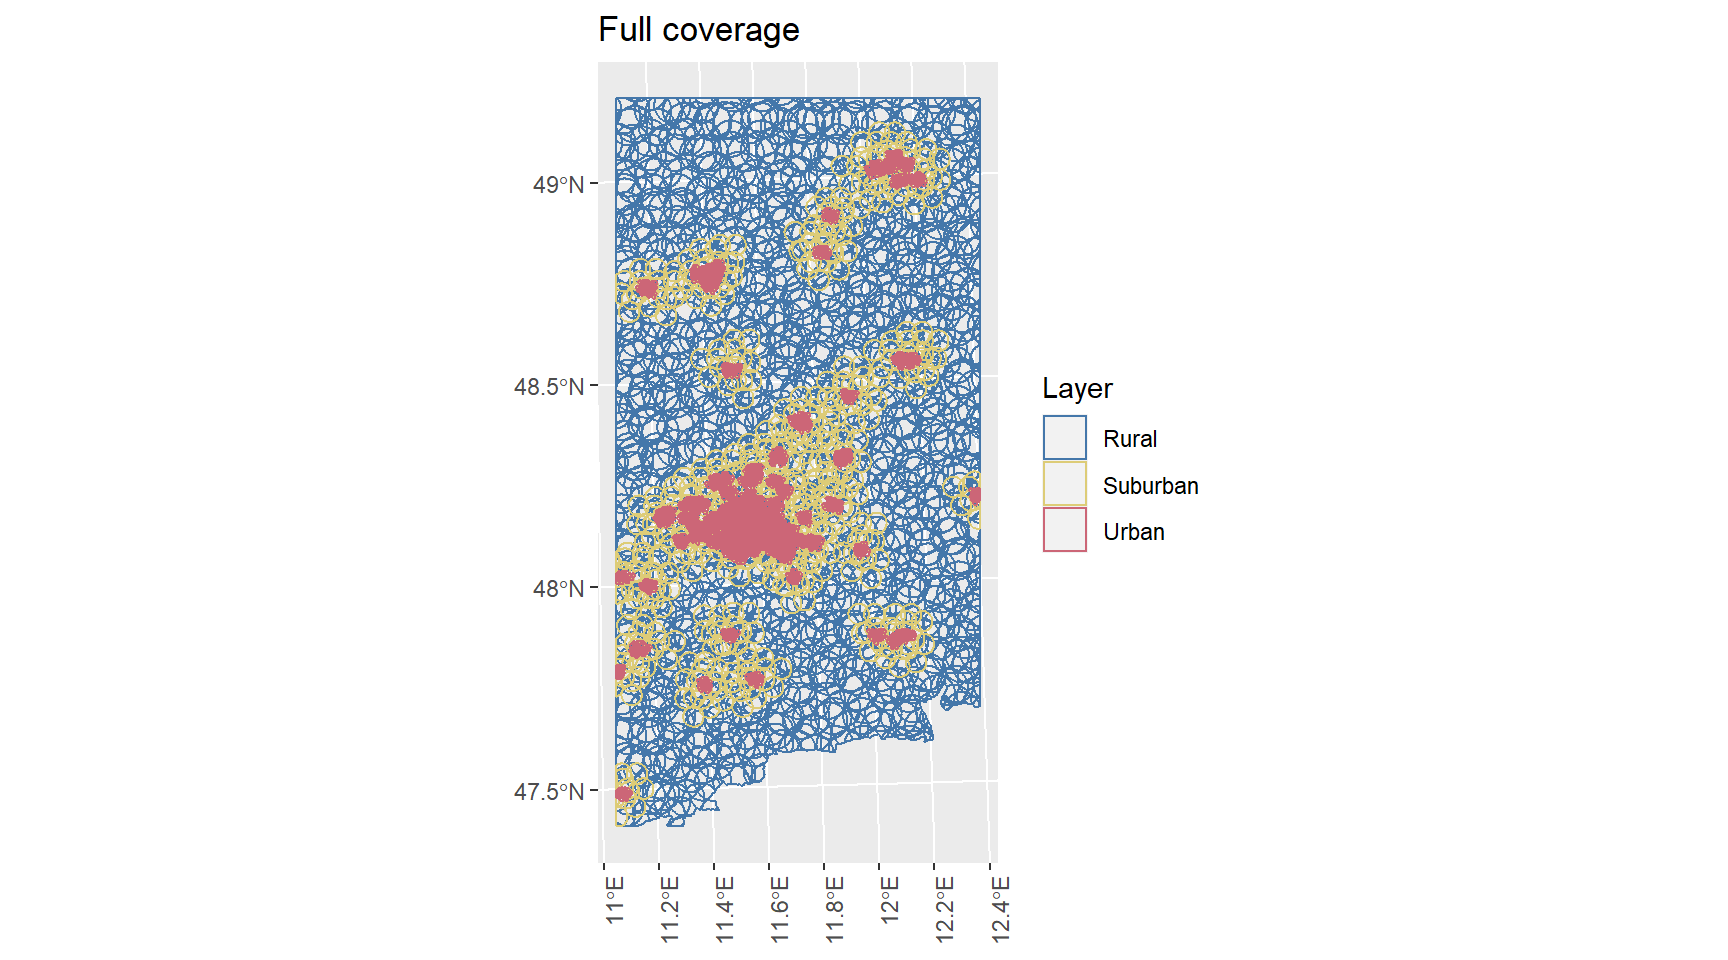 The figure on the left shows the geographical distribution of the tiles classified into the three layers based on the spatial clustering. On the right side, the coverage per layer is represented. The full coverage corresponds to the population density.